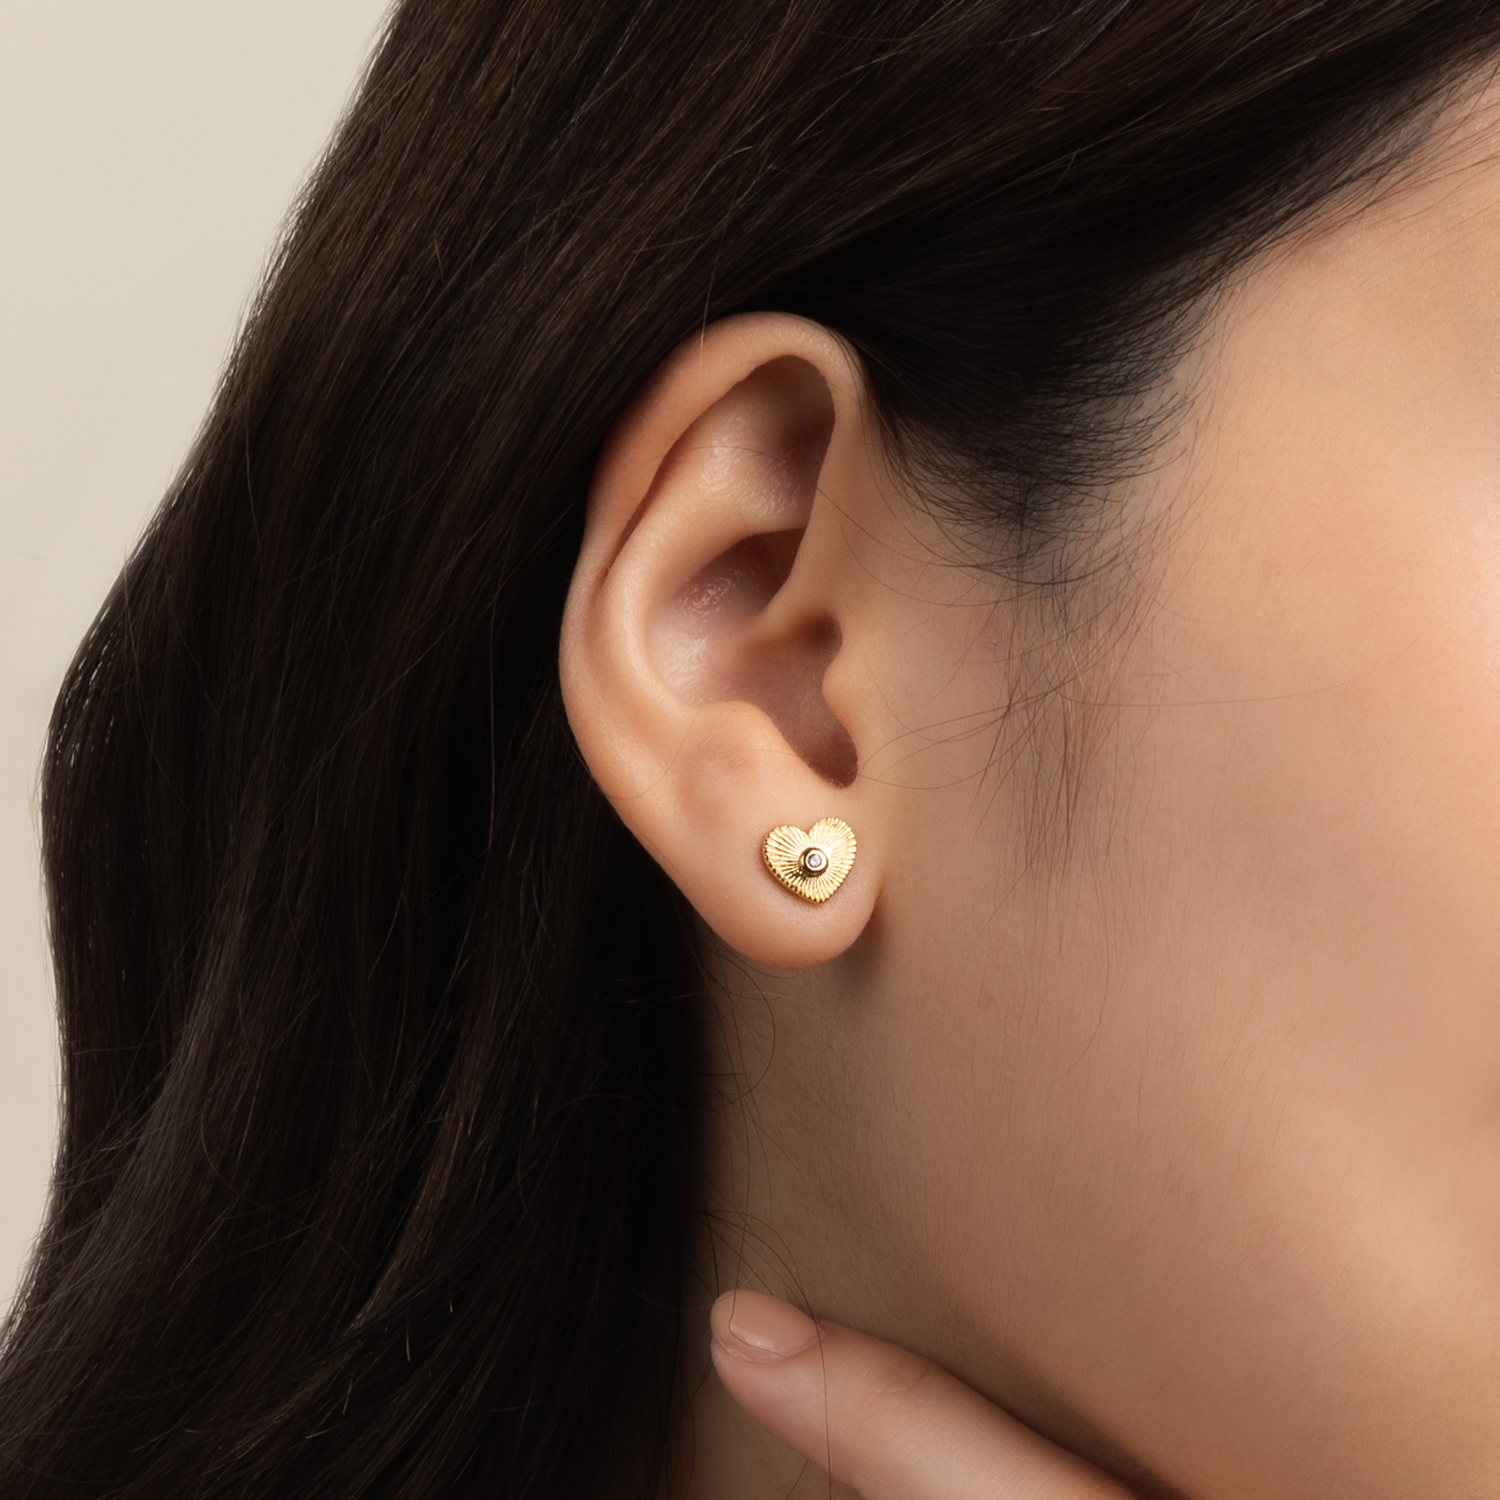 Model is wearing charming and romantic heart shaped earrings in gold with cubic zirconia 